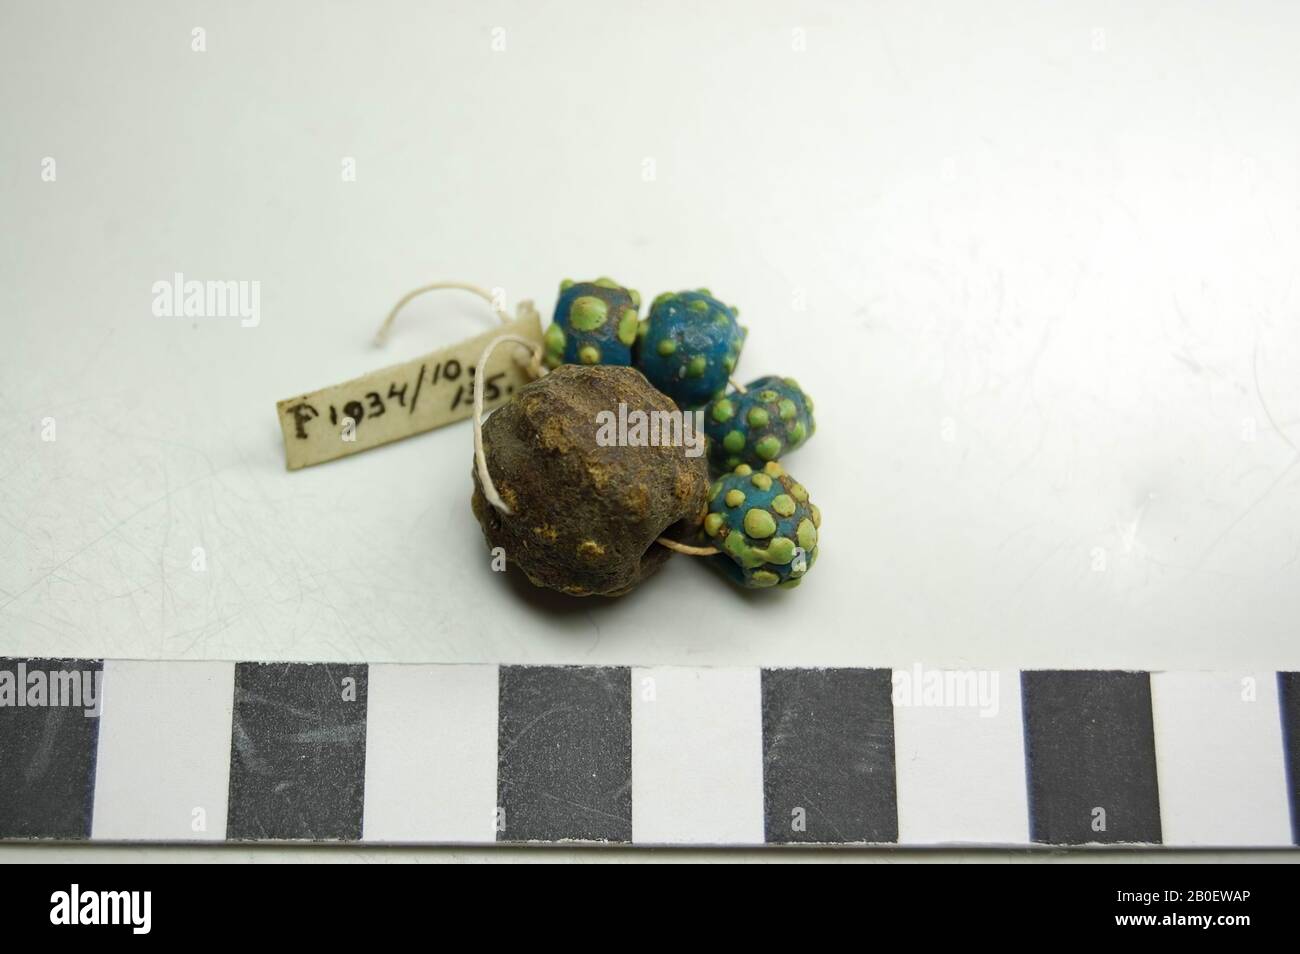 beads, Stringed string of 4 beads of turquoise glass with green nodules and 1 large, brown bead with yellow dots., Loose beads, glass, Third Intermediate Period, Egypt Stock Photo